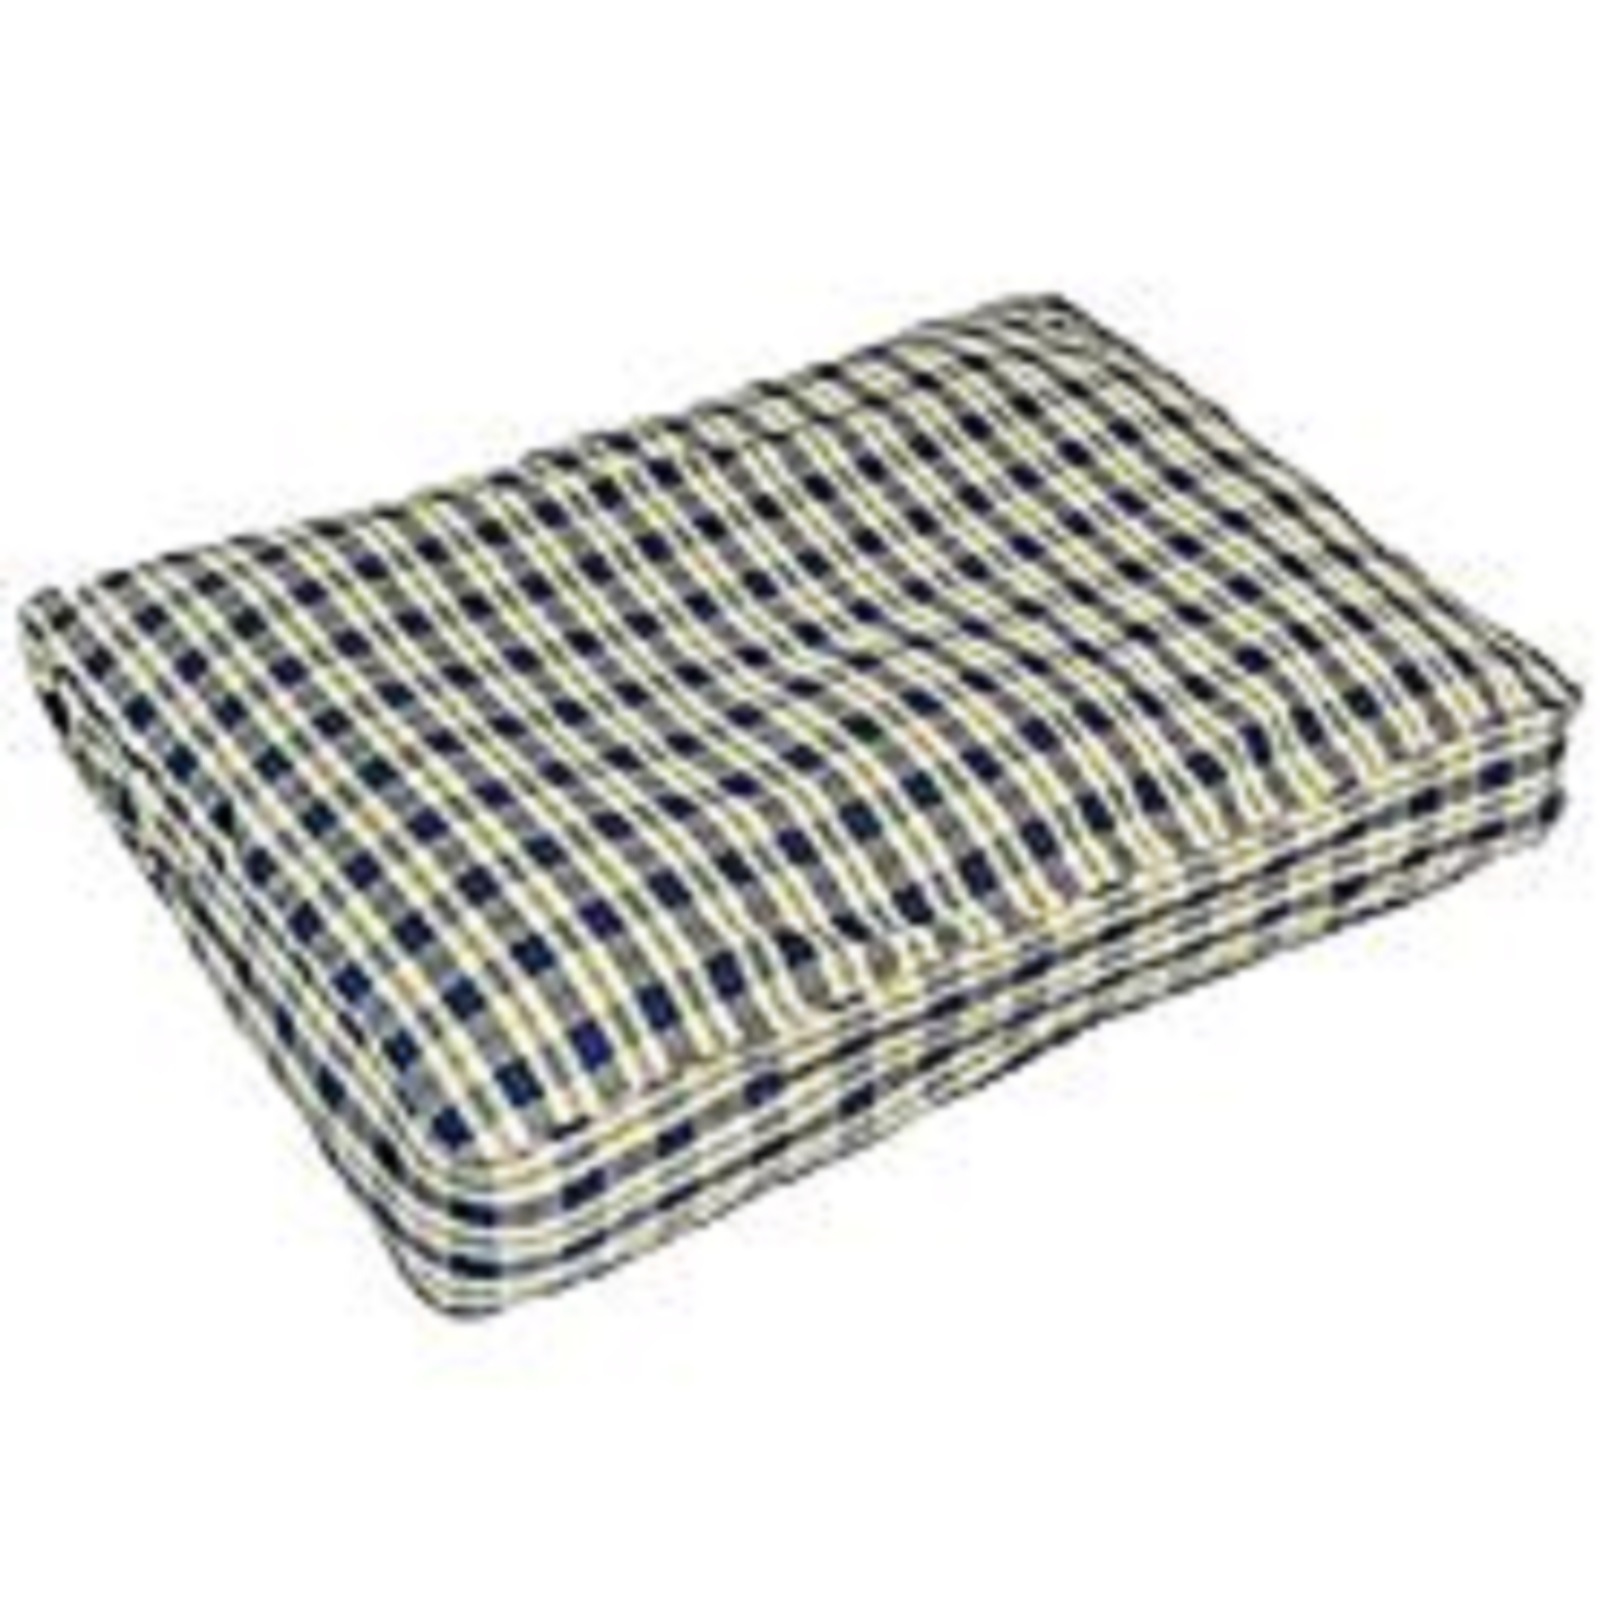 Happy Hounds Buster Dog Bed - Extra Small (18 x 24" ) - Navy Plaid